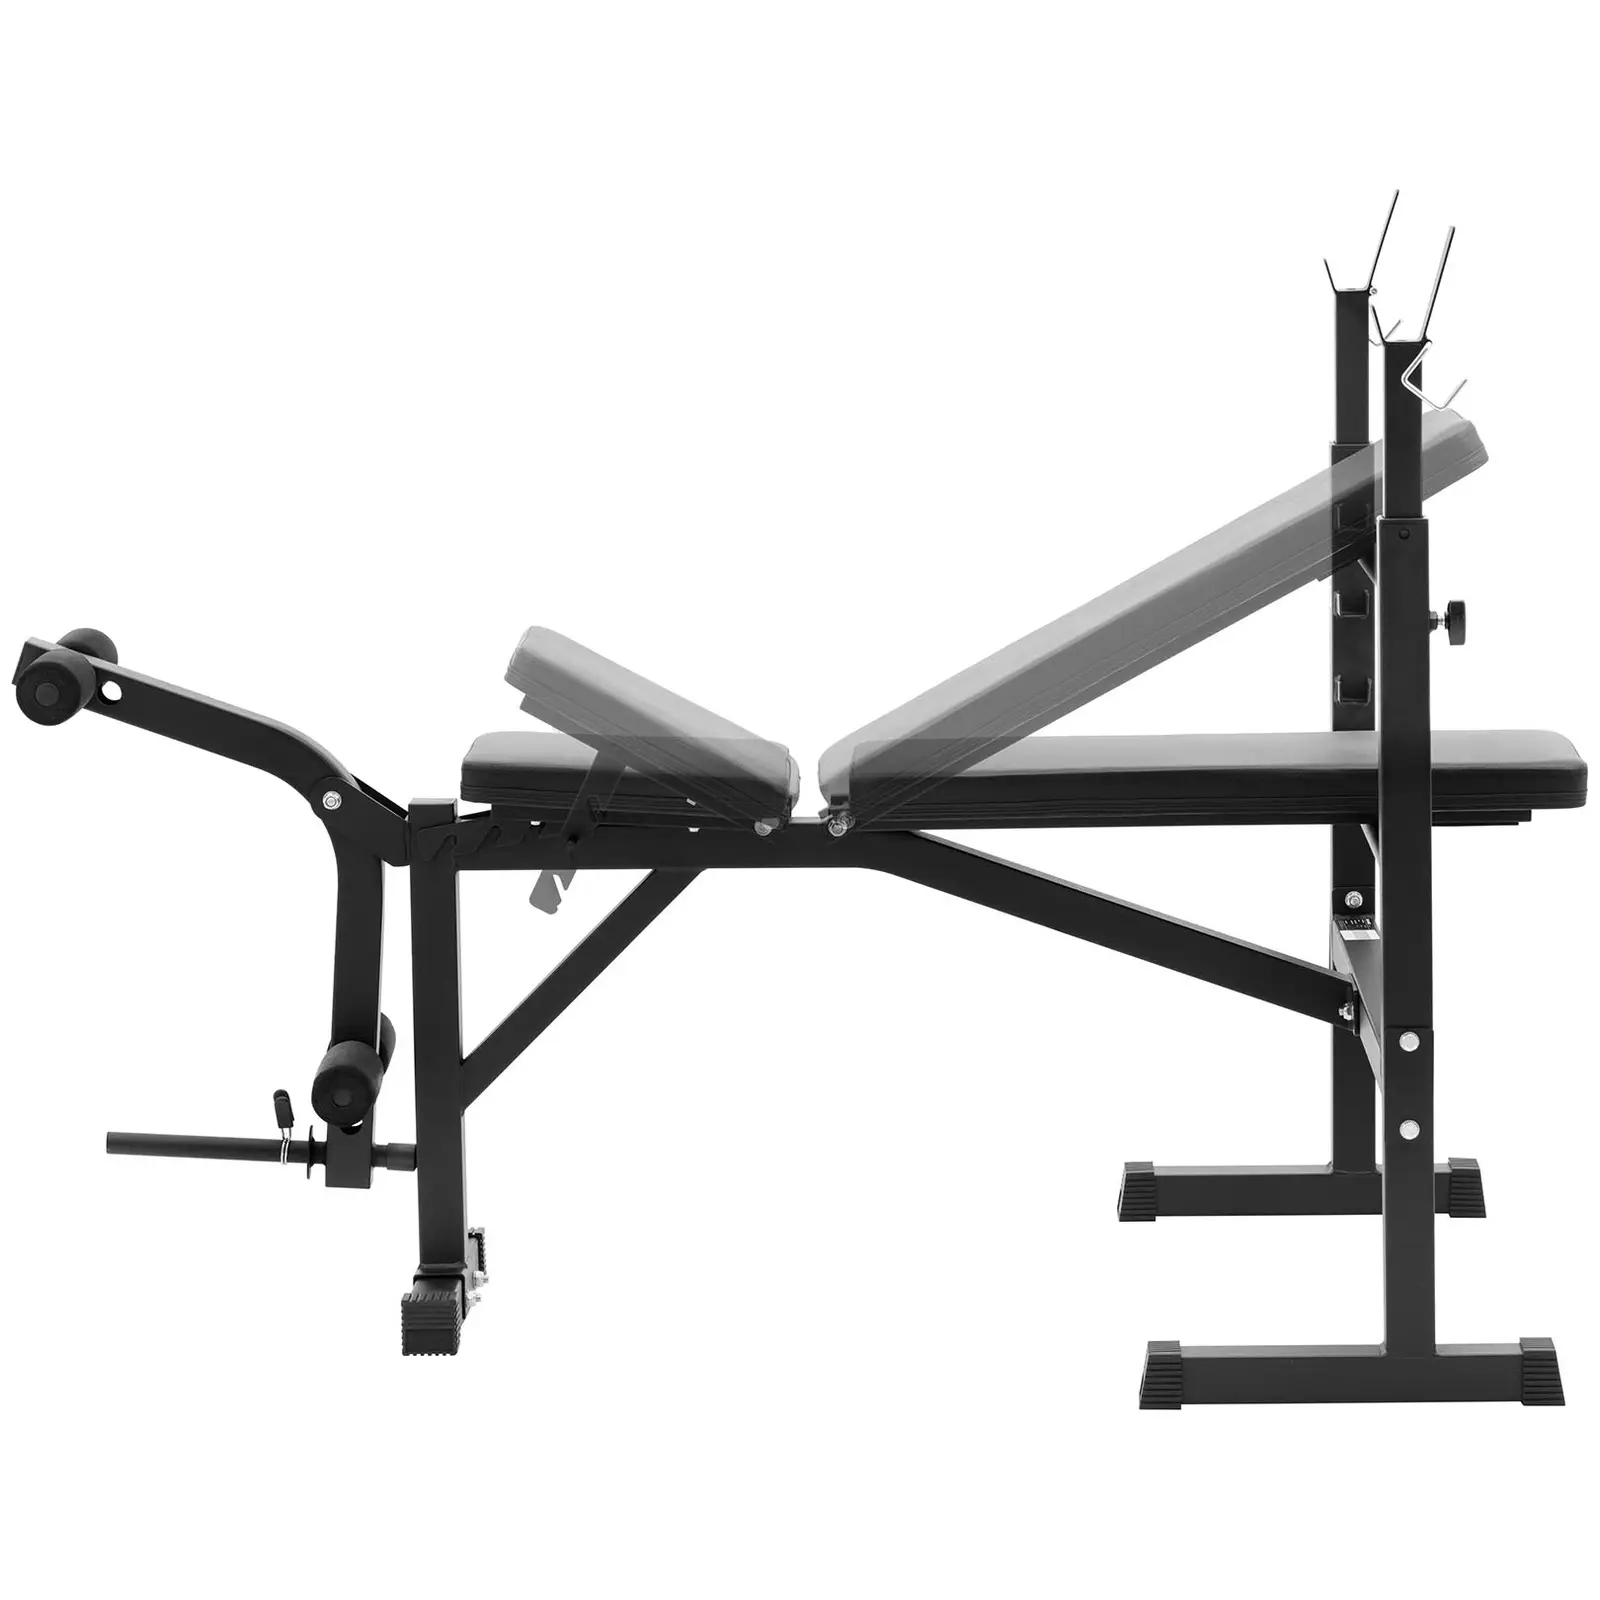 Multifunctional Weight Bench - supports up to 100 kg - adjustable - 180 - 152° inclination